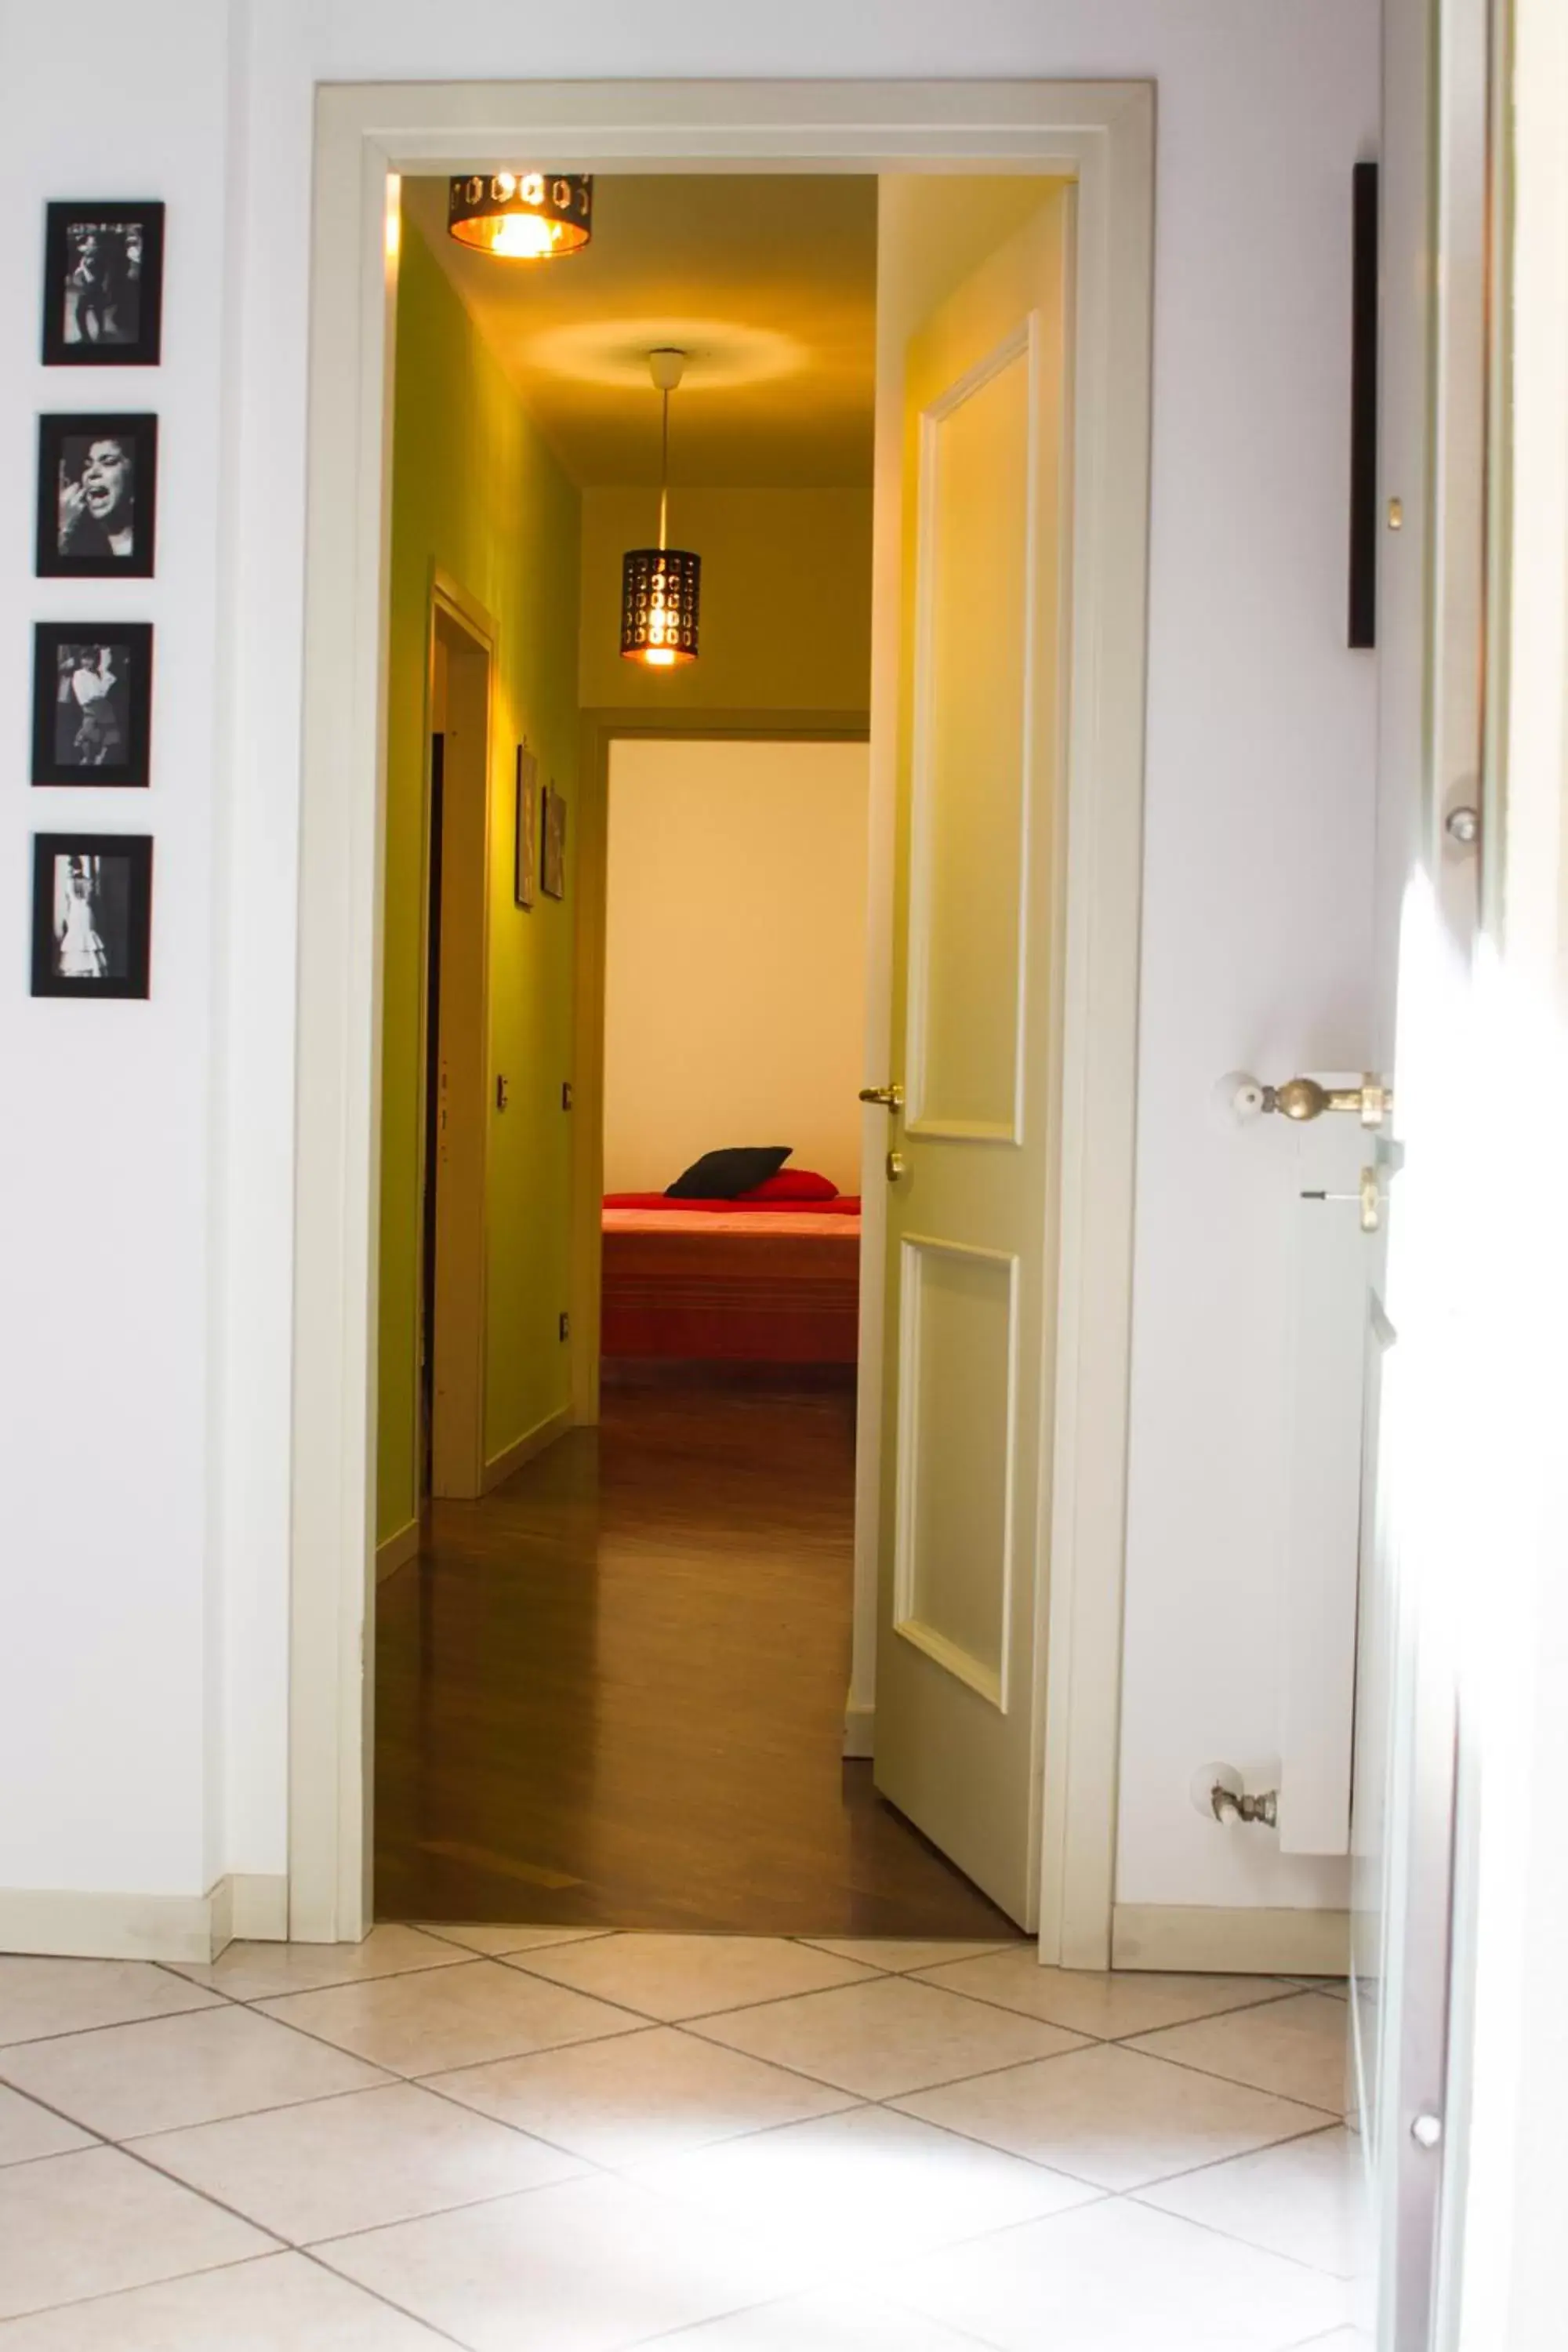 Area and facilities in Amici Miei Rooms